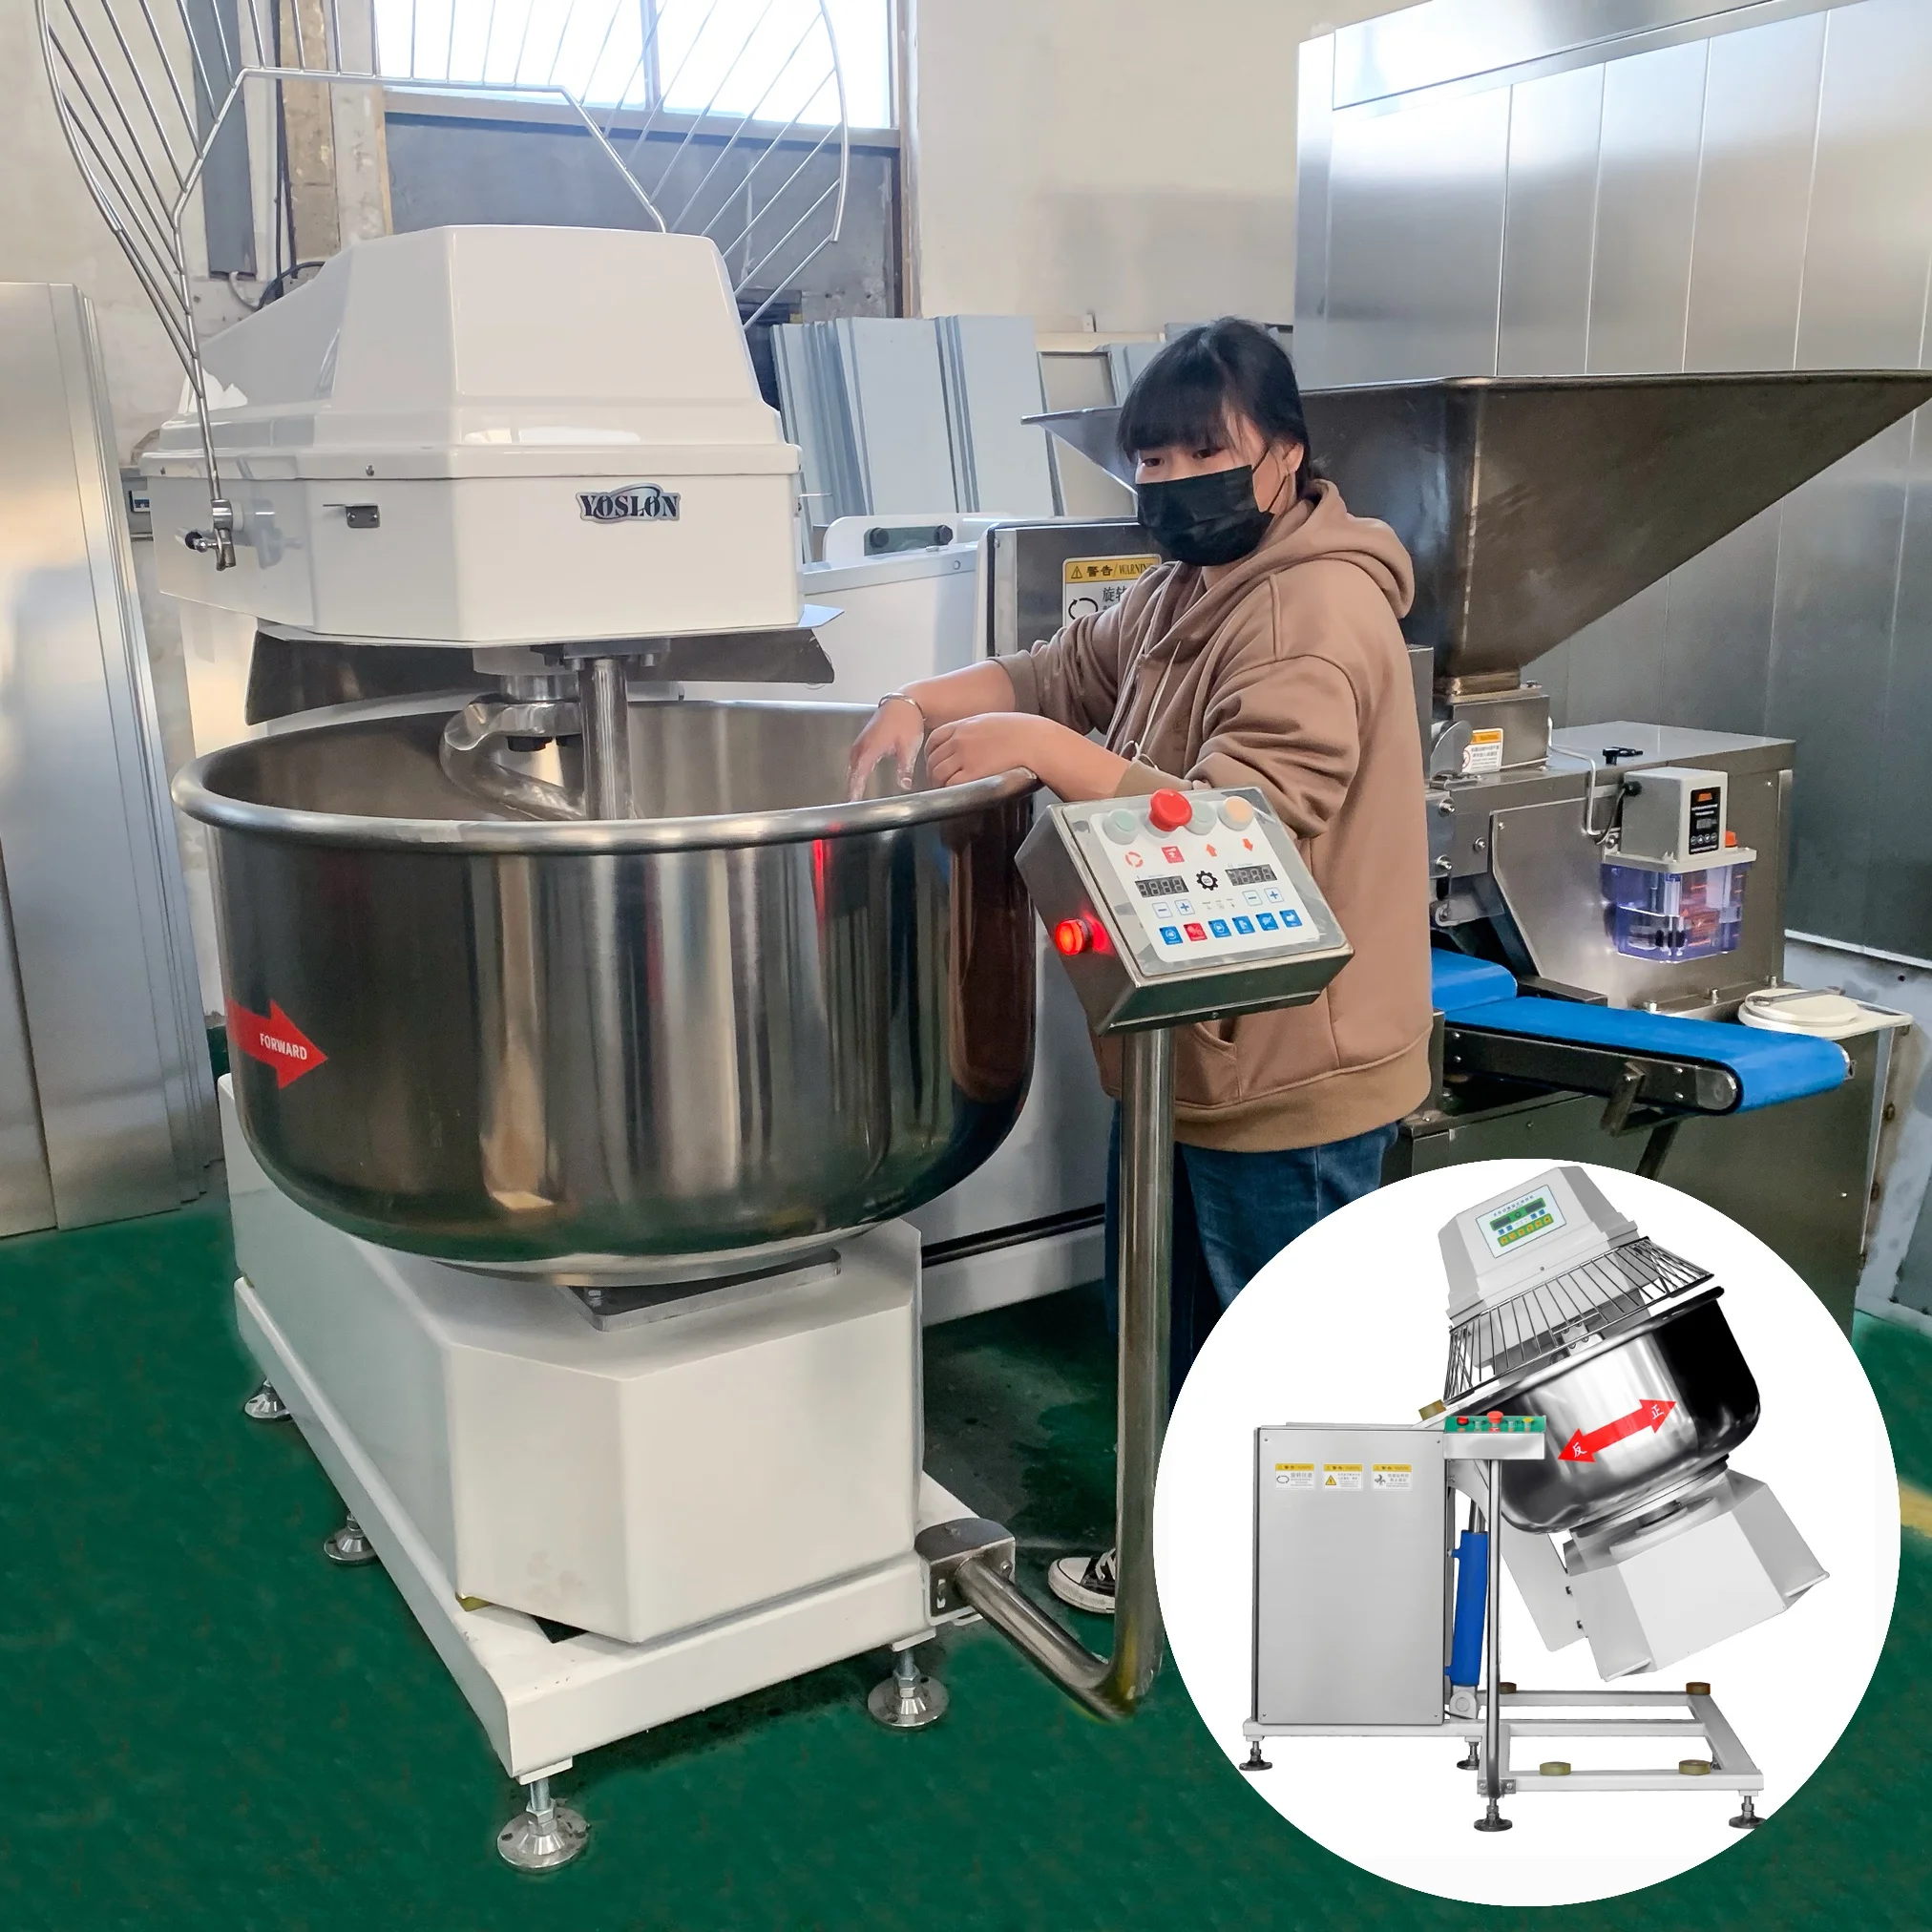 For Industrial, bakery and restaurant Stainless Steel Commercial Dough Mixer,  Capacity: 6-50Kg